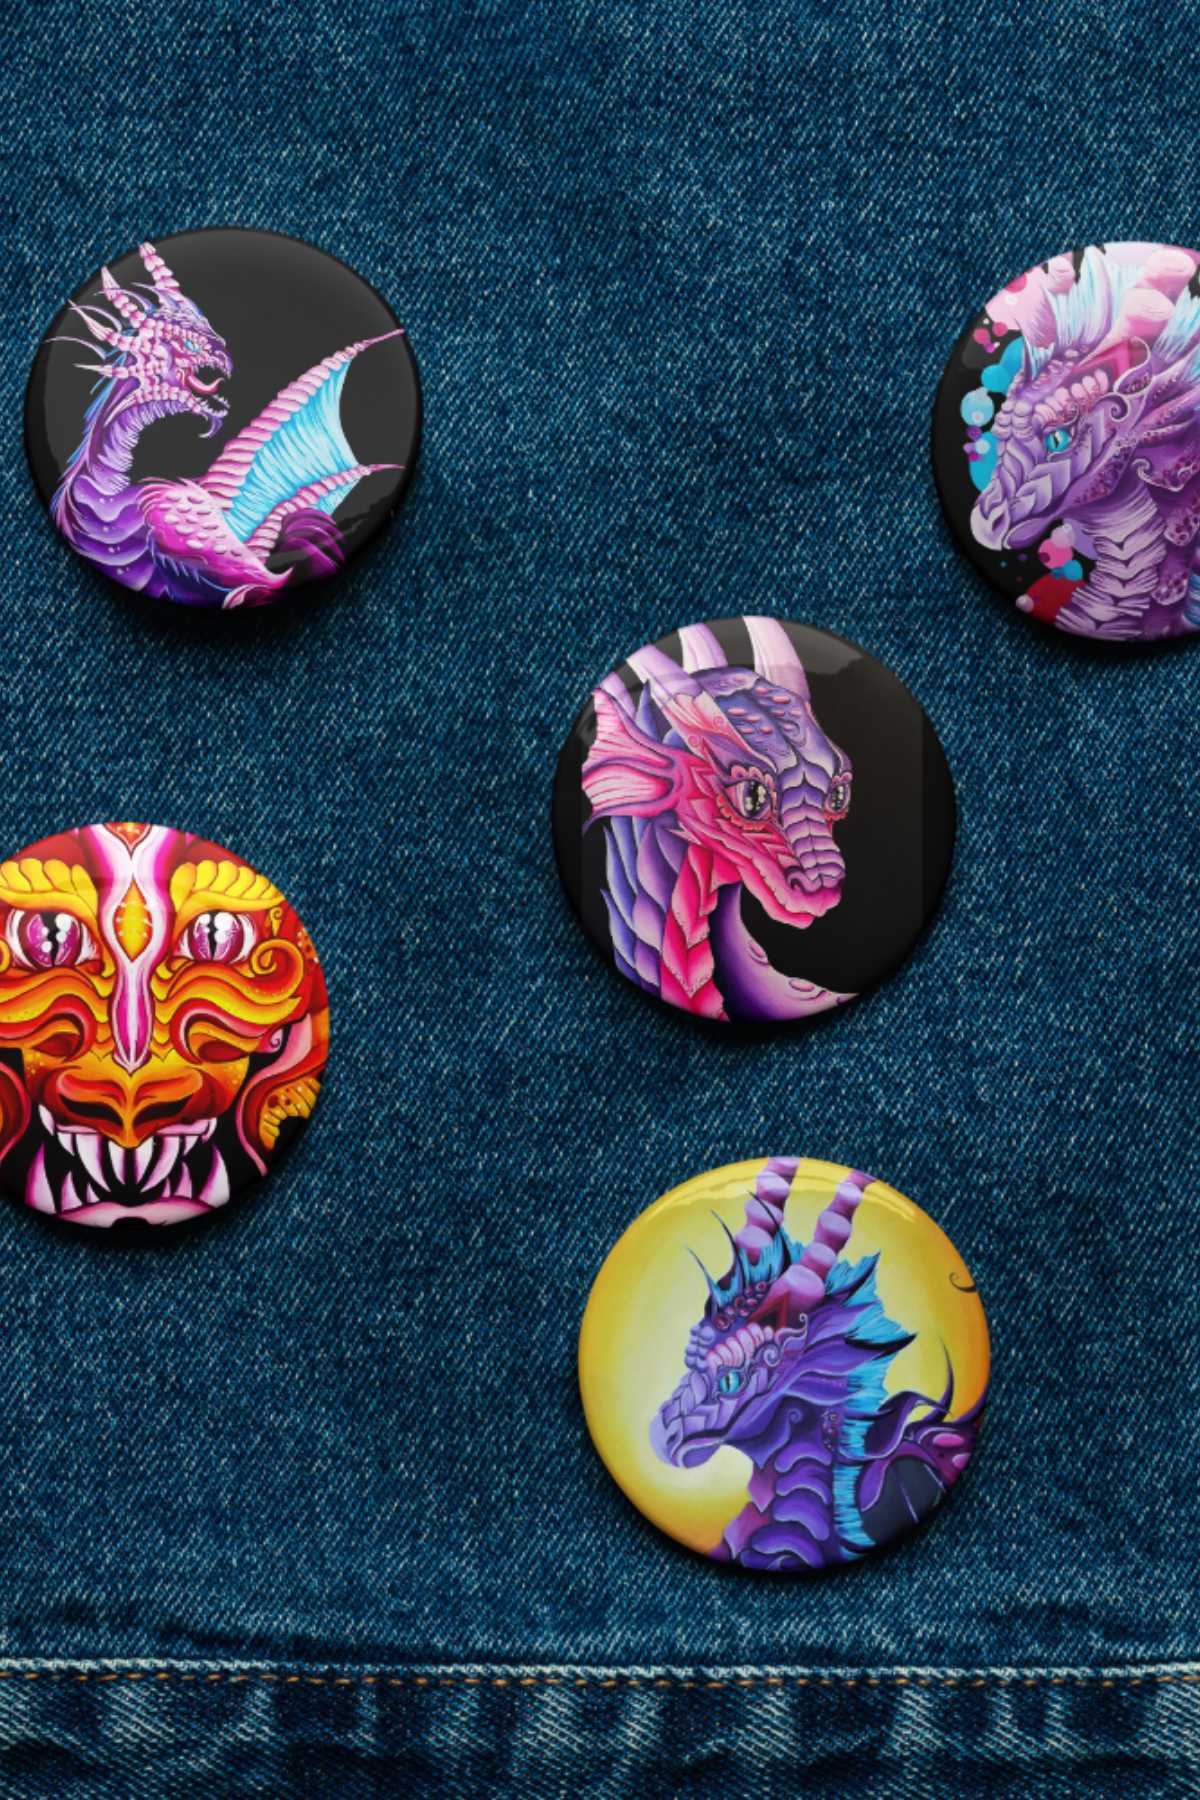 Pack Of 5 Mythical Dragon Badges